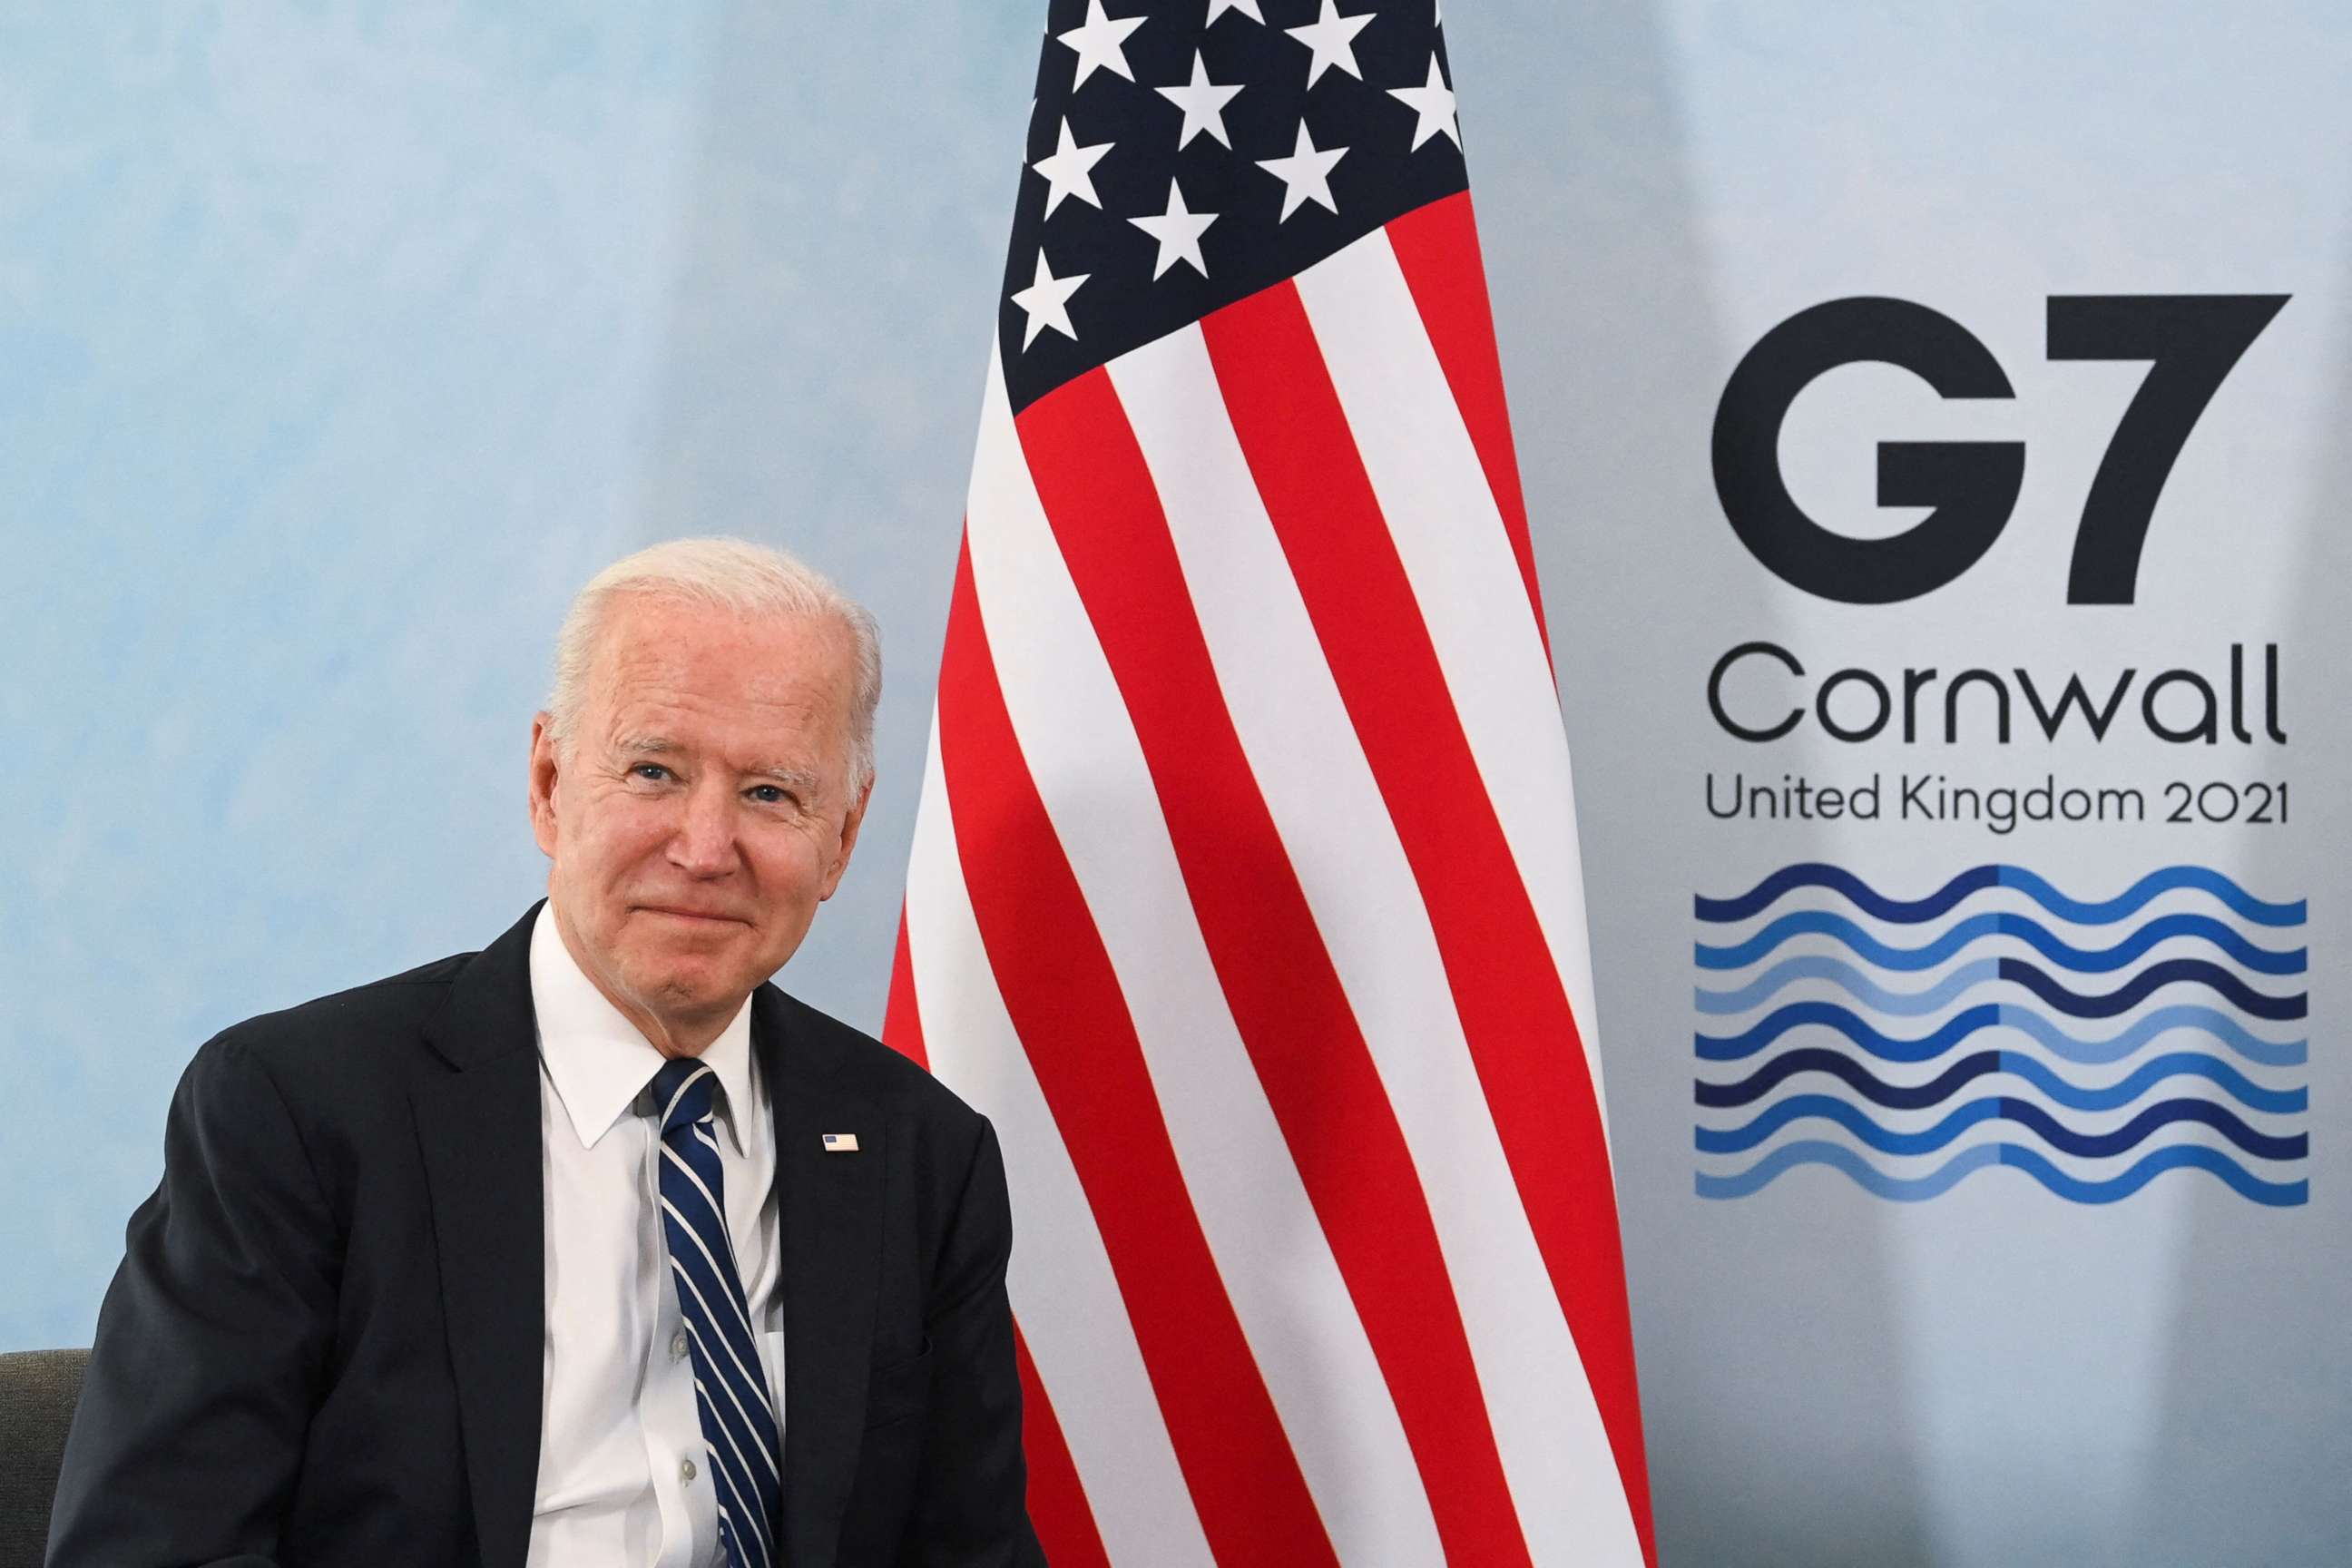 PHOTO: President Joe Biden poses for a picture during a meeting ahead of the G7 summit at Carbis Bay, Cornwall, June 10, 2021.